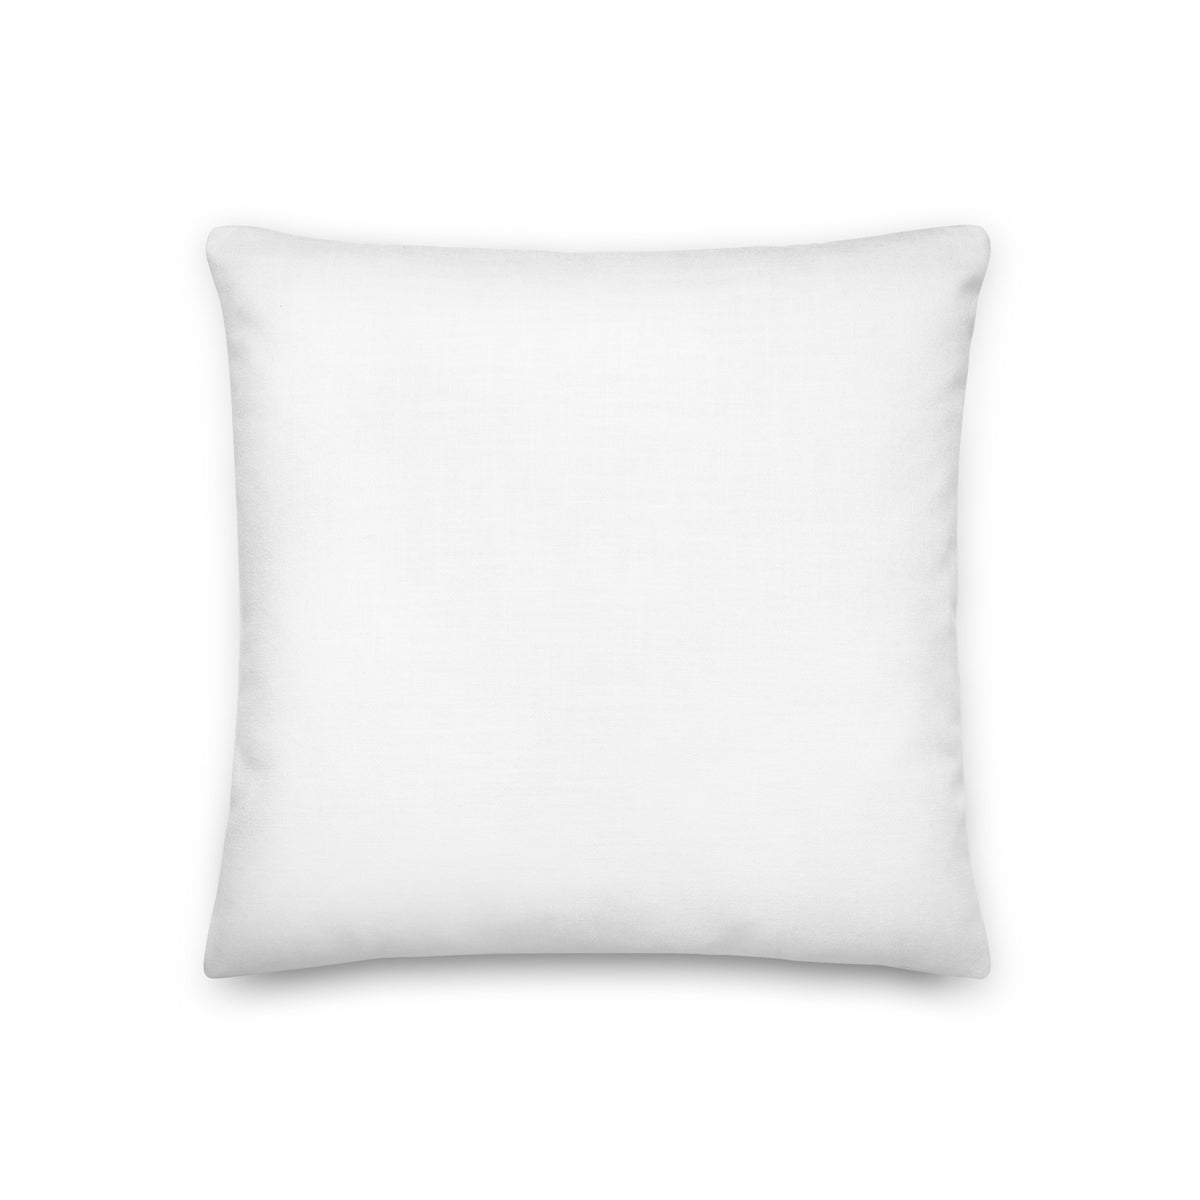 Back view in white of a Premium Pillow with an ink drawing of a 1920's woman in a mask and holding a long cigarette